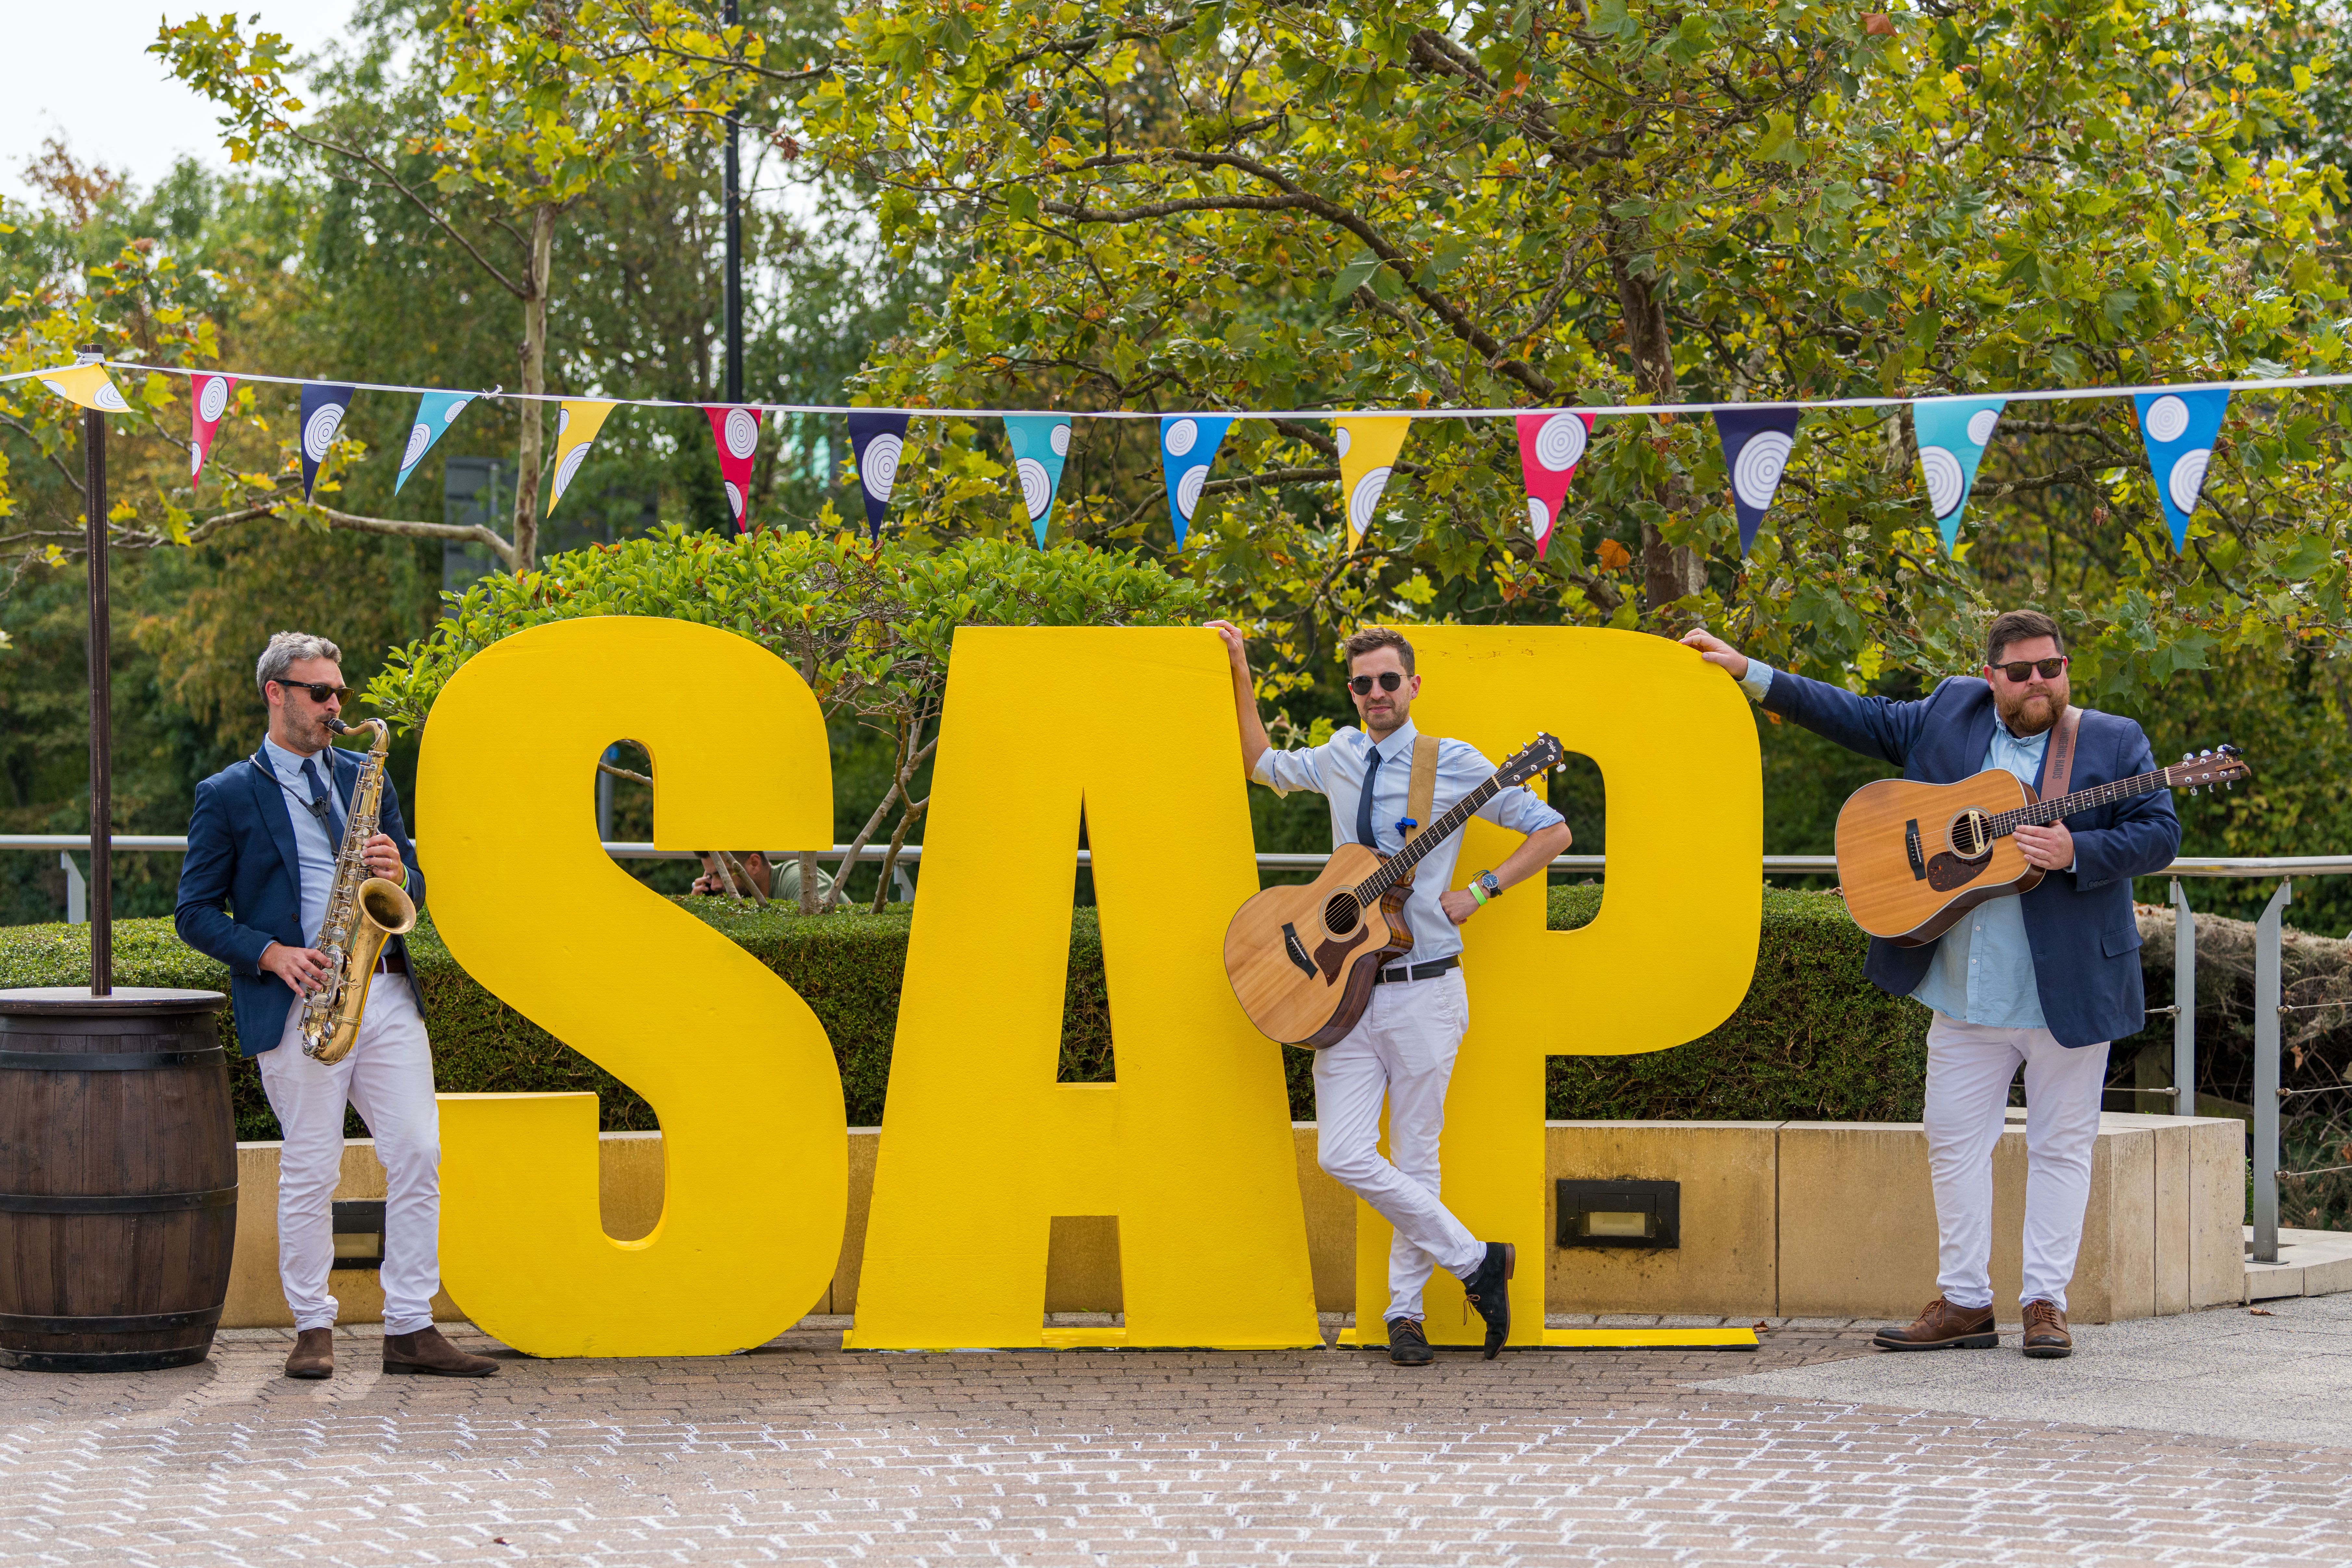 Having already collaborated with SAP UK & Ireland in delivering end-to-end event services for their headquarters and London-based office, V-Ex looks forward to fostering a deeper partnership with the marketing and communications team at SAP.